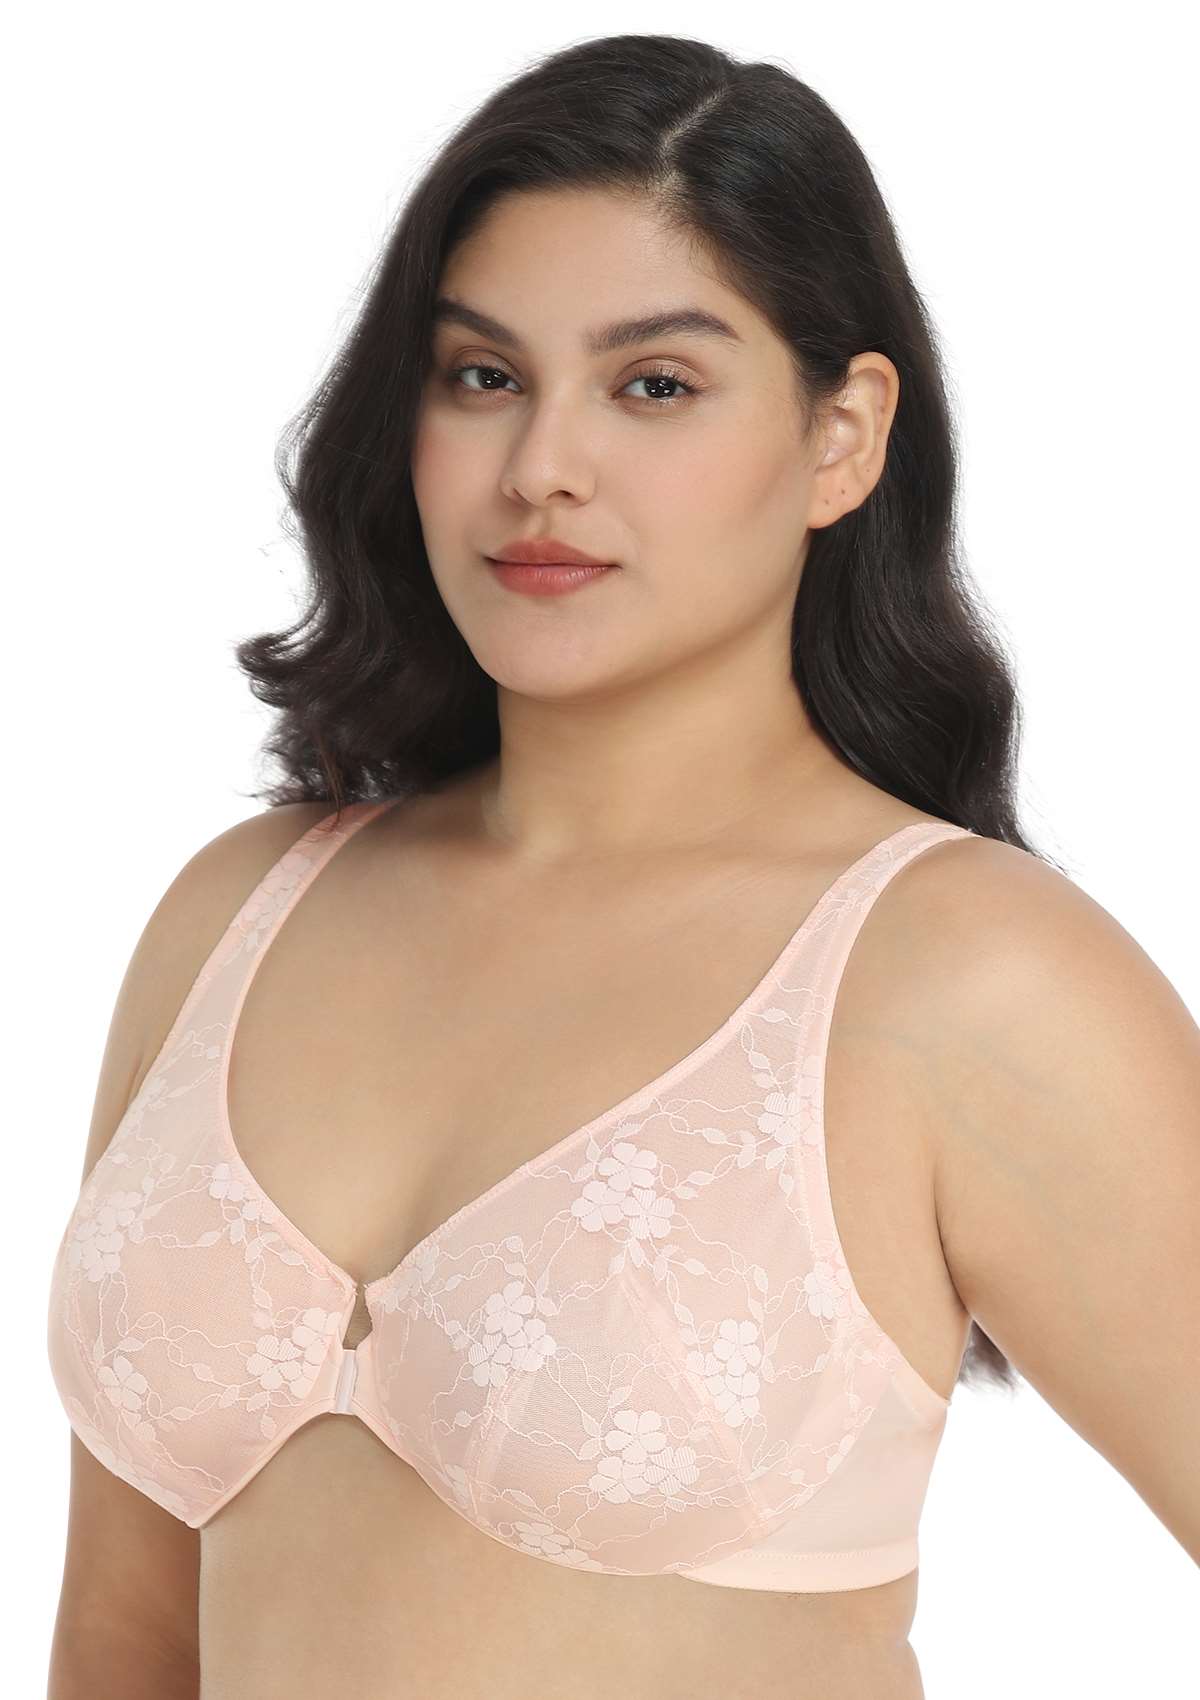 HSIA Spring Romance Front-Close Floral Lace Unlined Full Coverage Bra - Dusty Peach / 34 / G